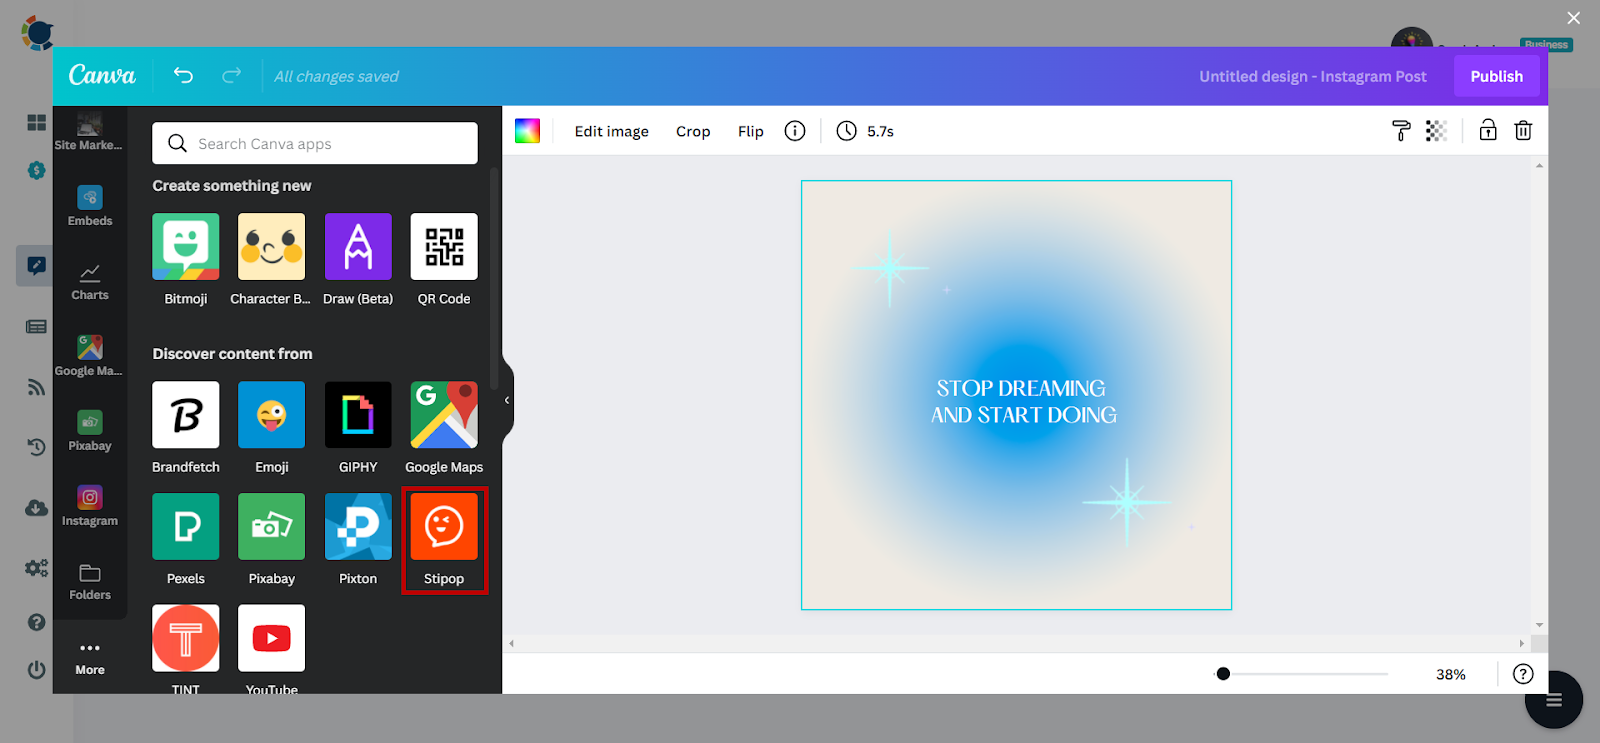 You can access to Stipop through Canva board on Circleboom